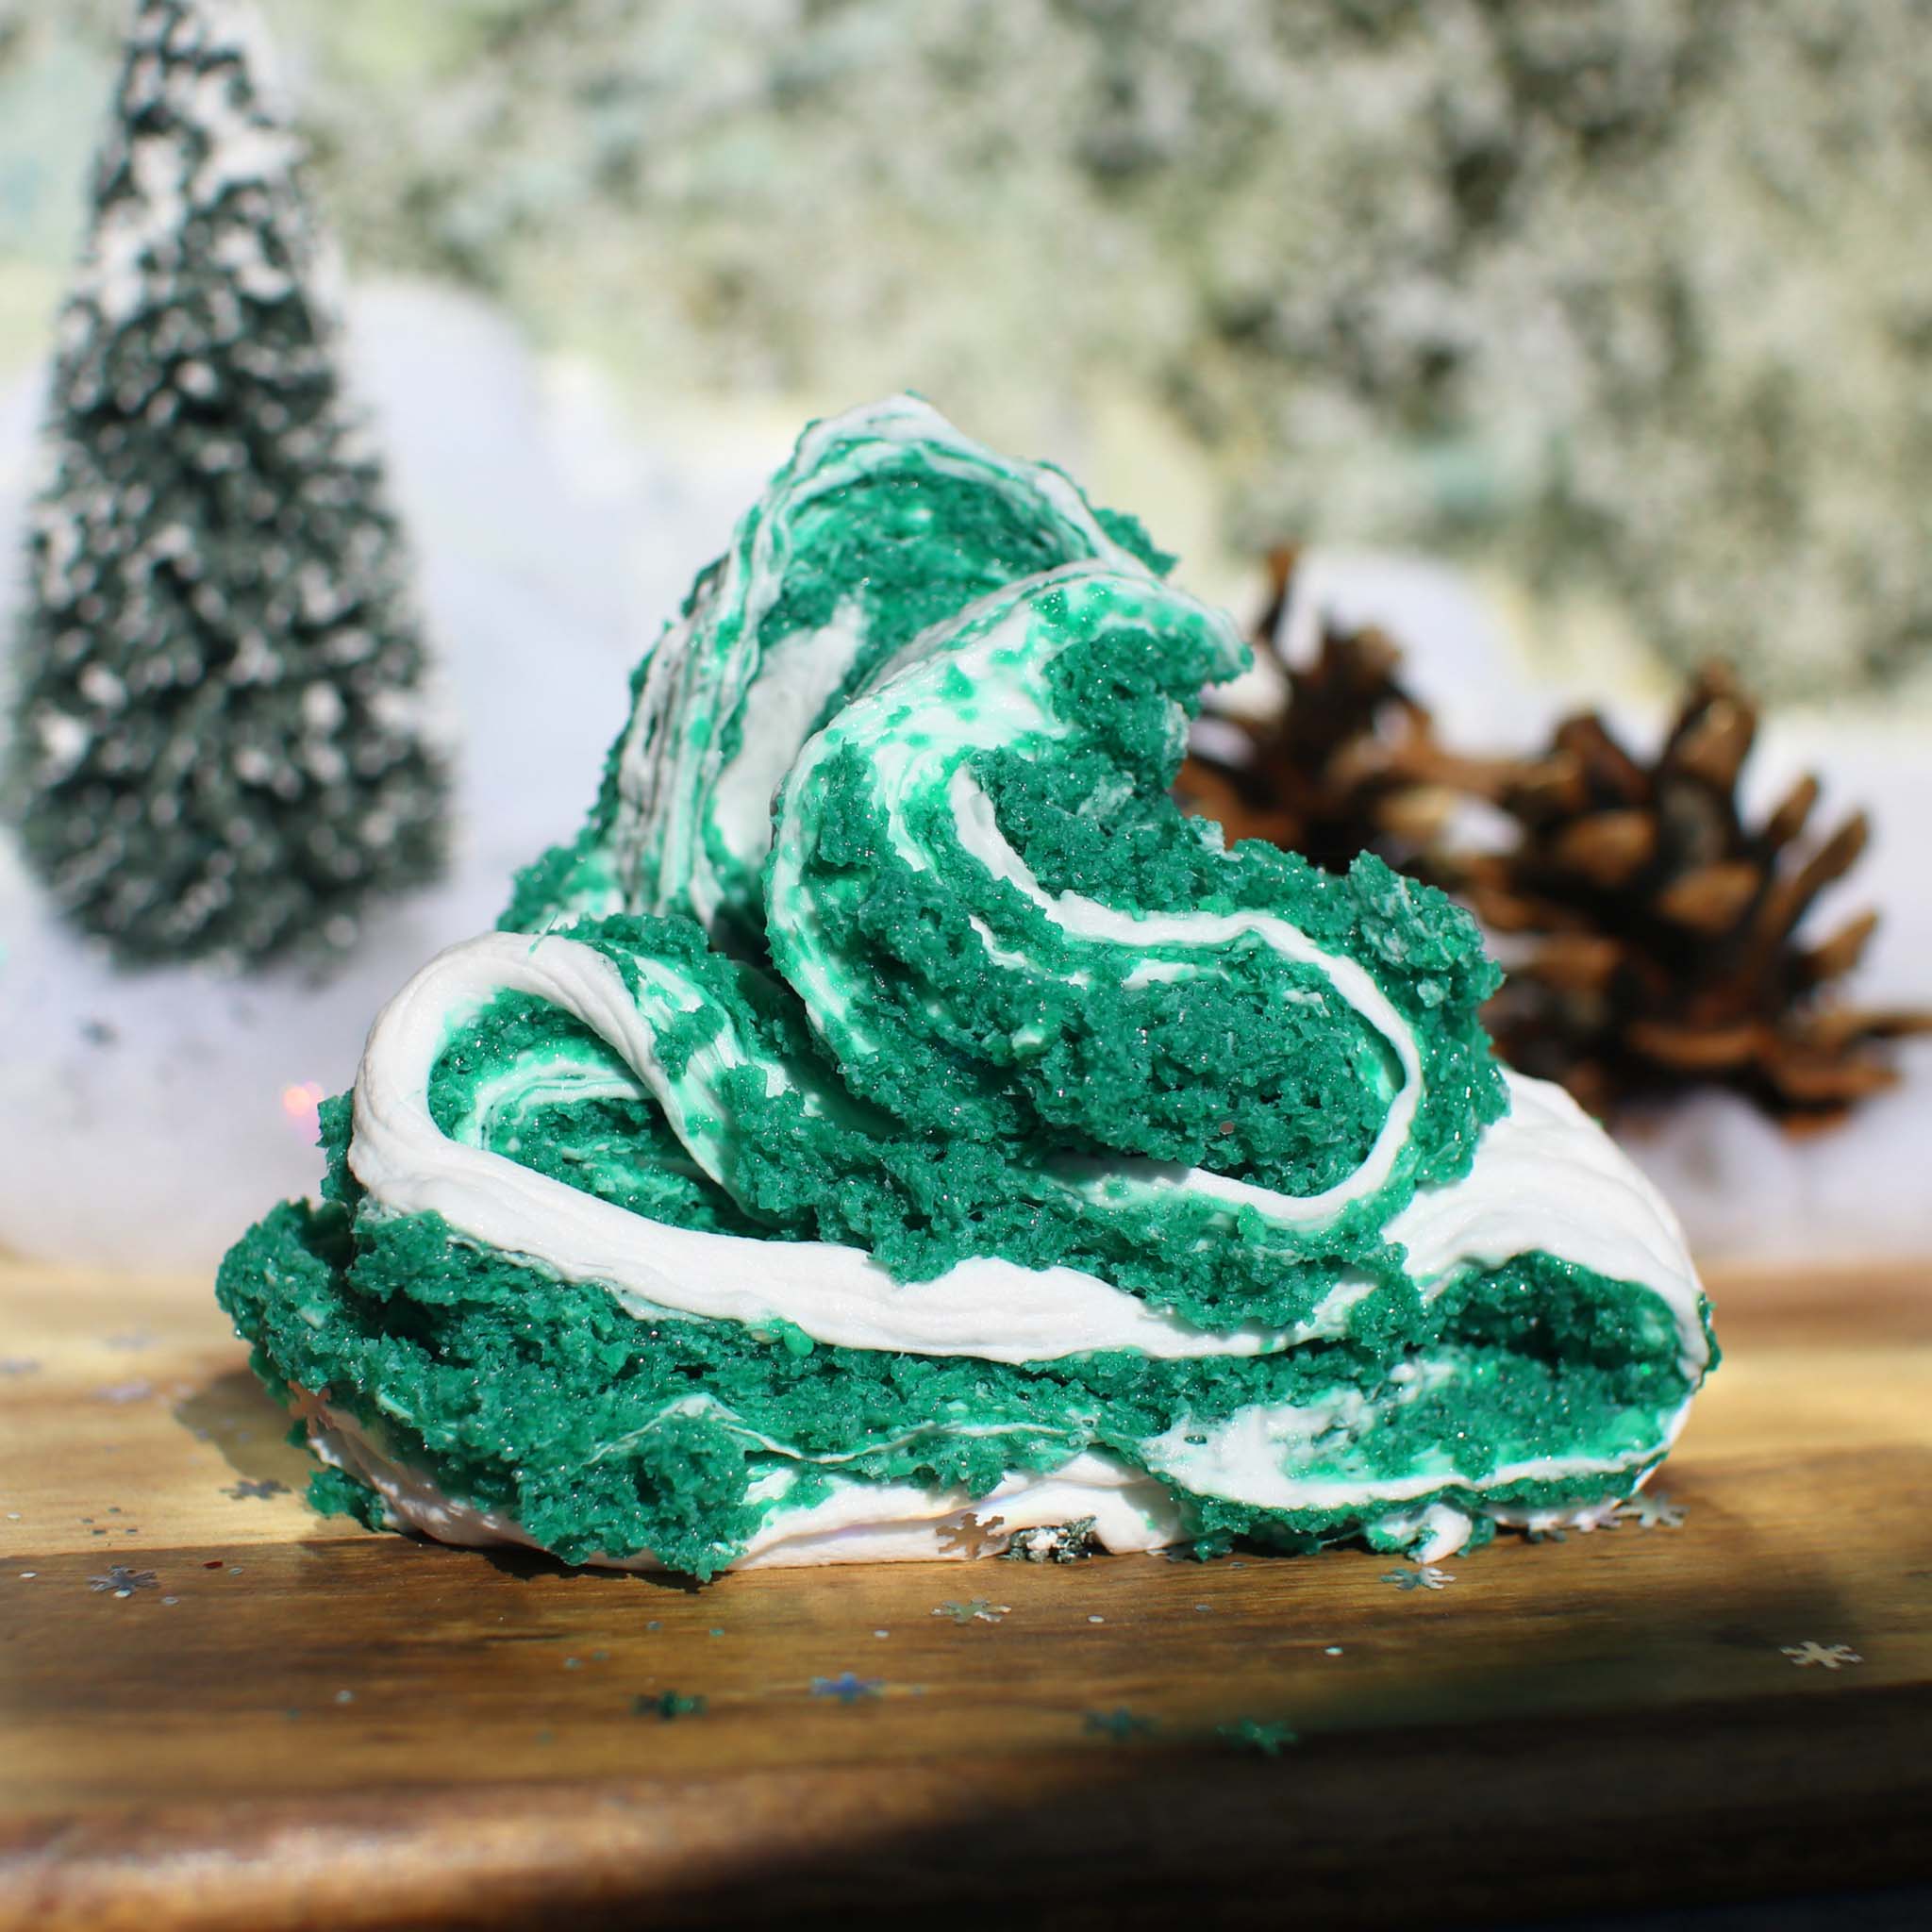 Snowy Christmas Morning Christmas Slime Gift For Kids Green White Tree Scented Clay Creamy Crunchy Butter Snow Fizz Slime Fantasies Shop 9oz Front View Decoration Swirl Layered